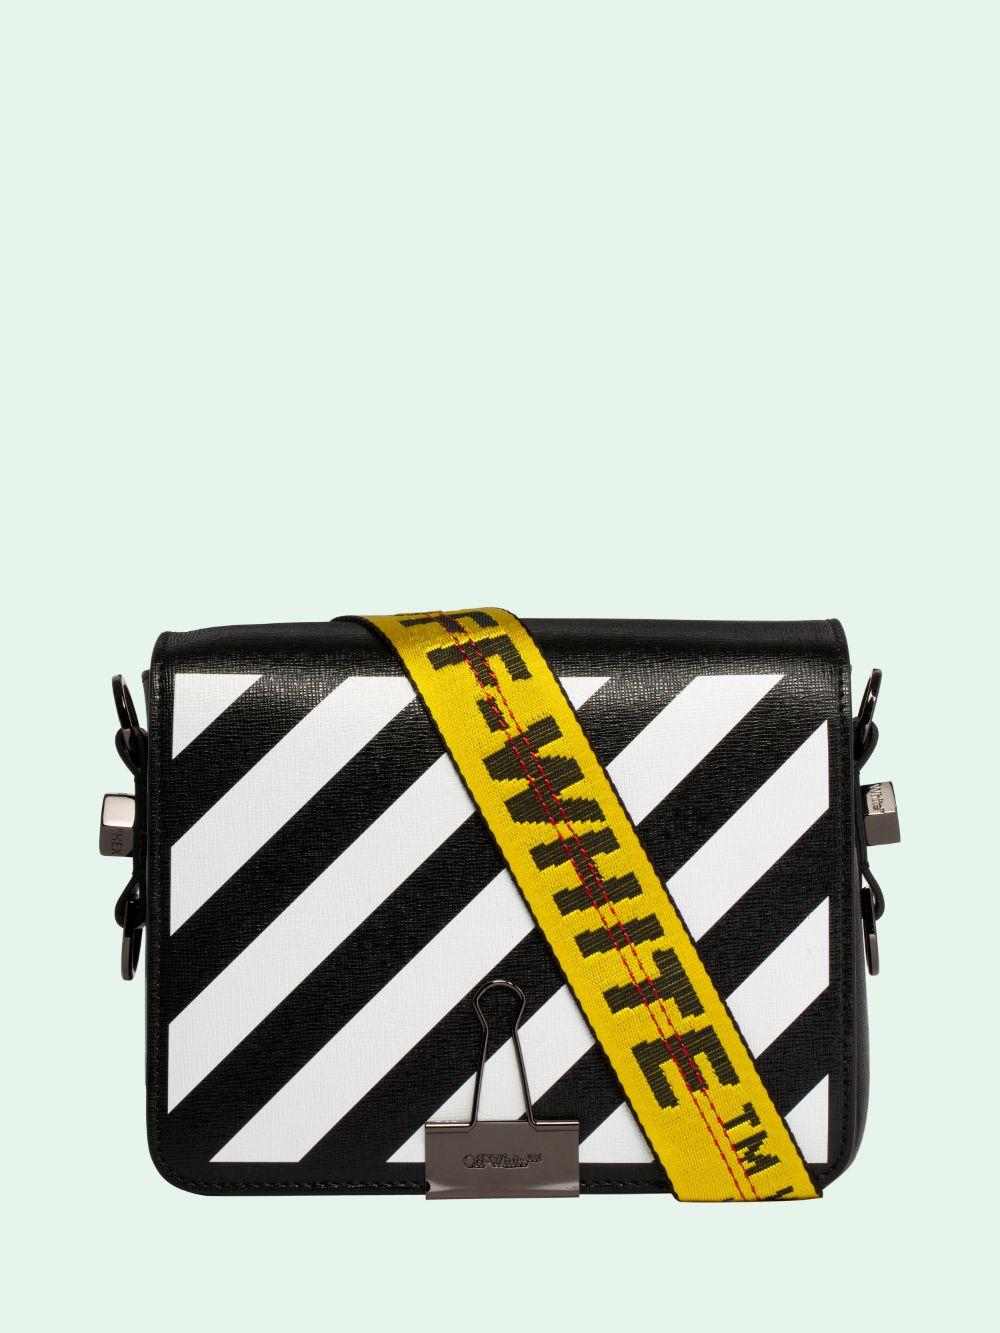 Off-White c/o Virgil Abloh Synthetic Diag Flap Bag in Black - Lyst